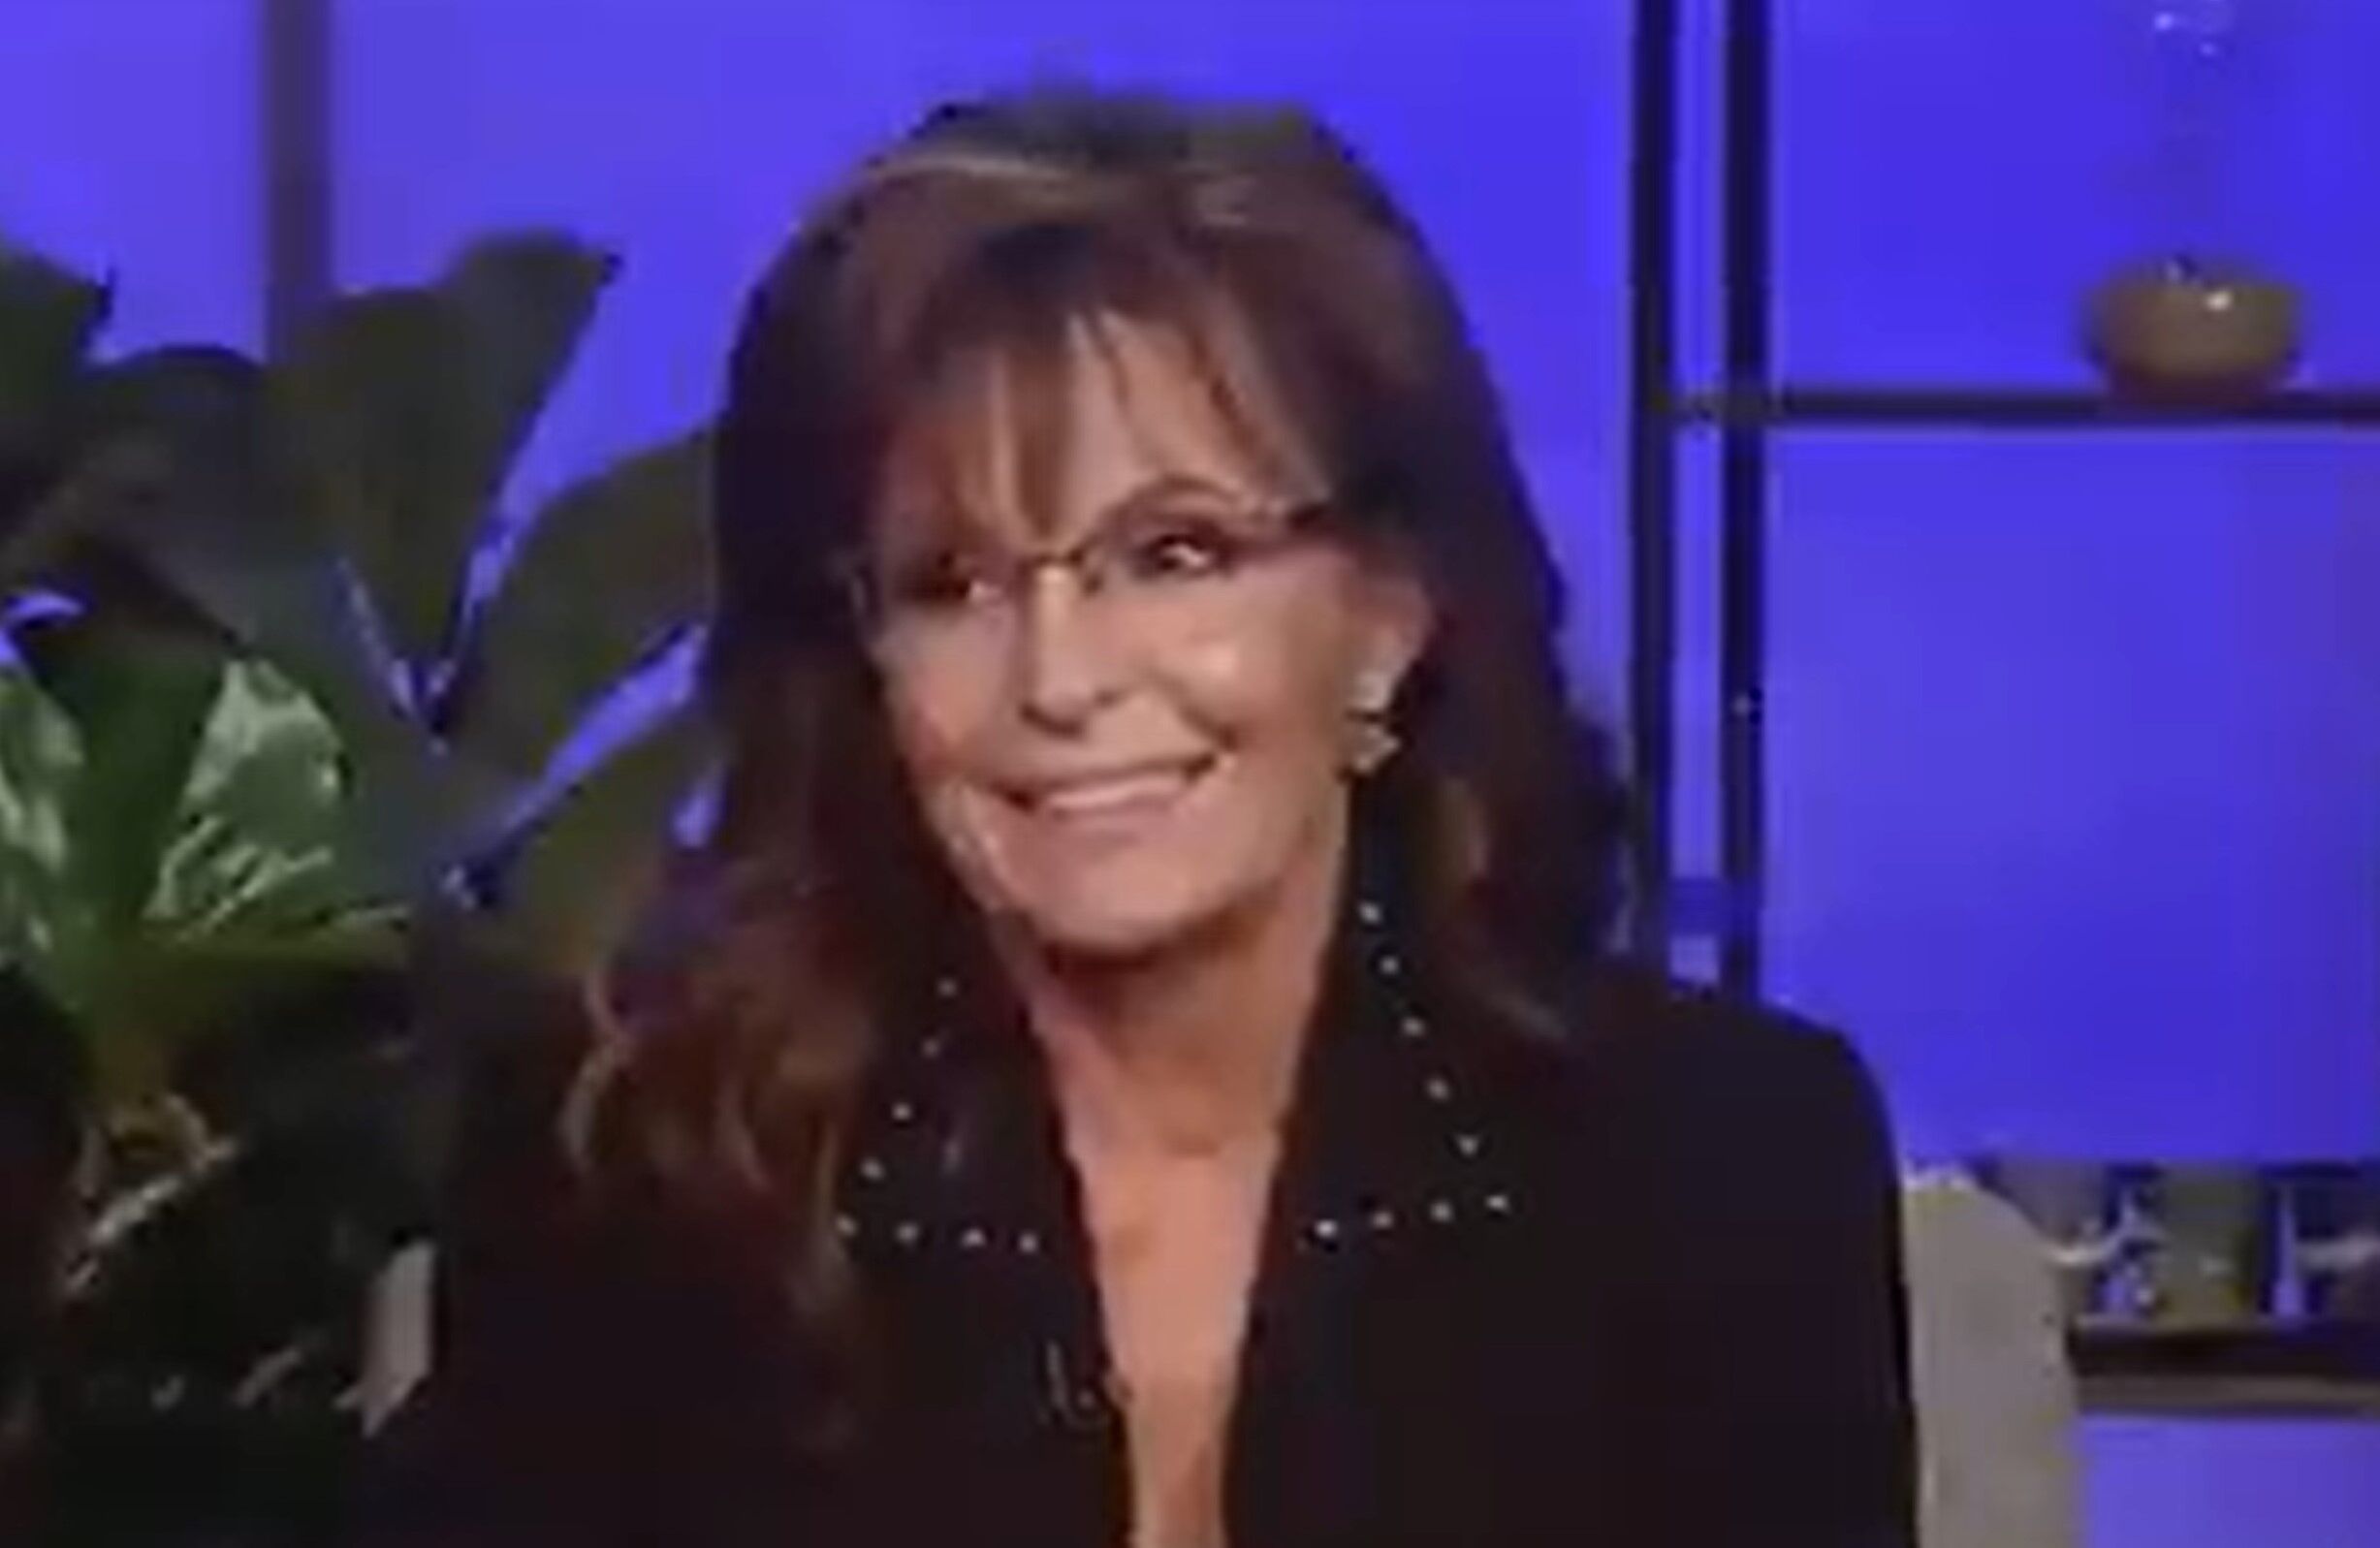 Sarah Palin right when the Fox host said it'd be "hotter" if he could call her governor.